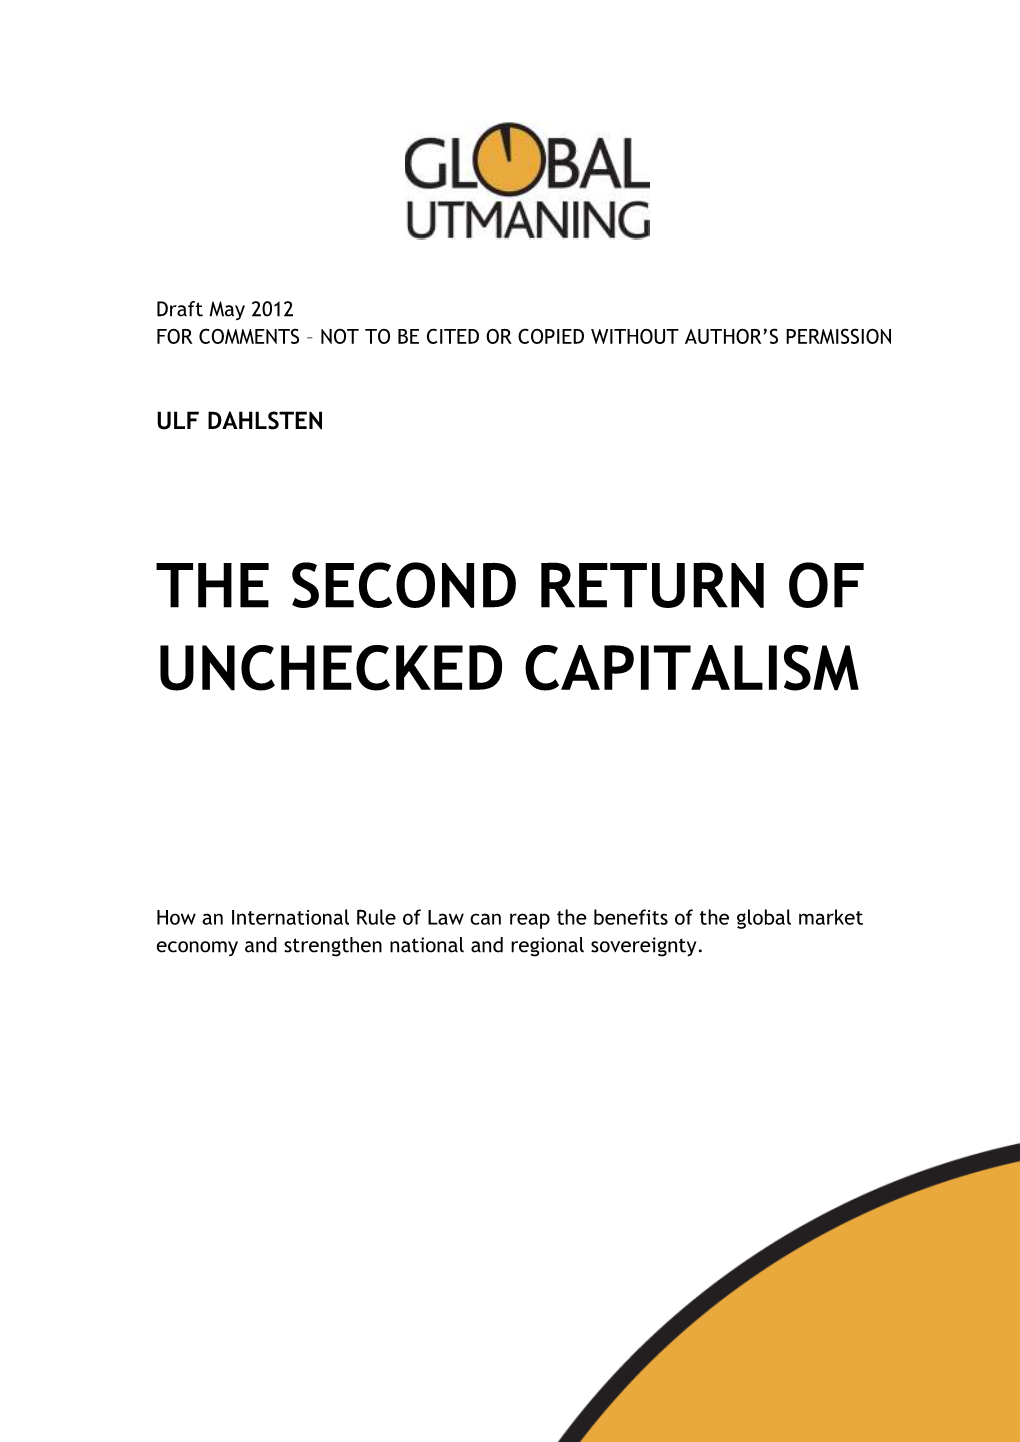 The Second Return of Unchecked Capitalism